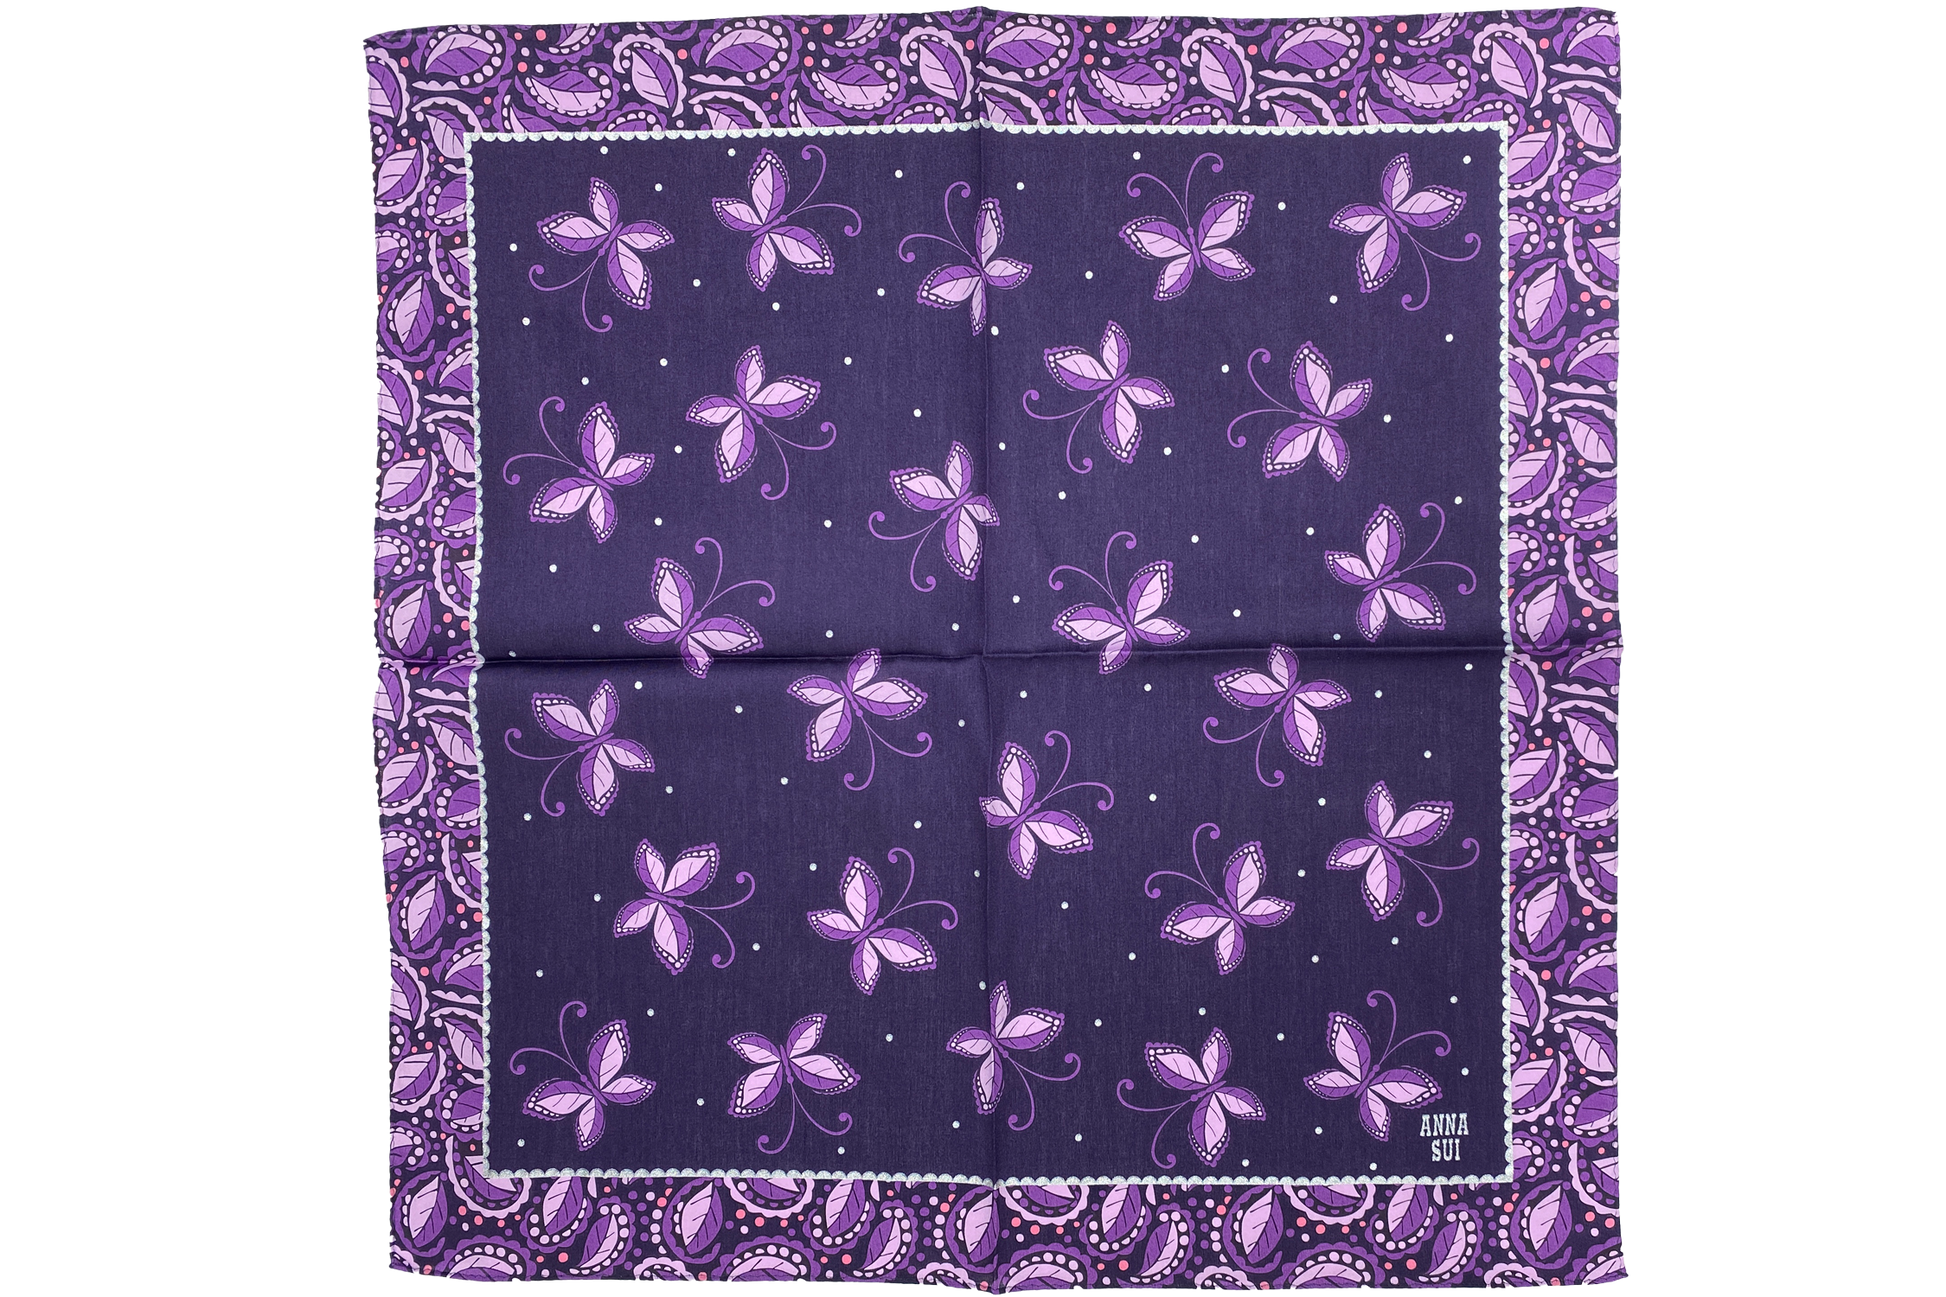 Handkerchief, squared purple with pattern of purple/white butterfly, floral hue of purple border